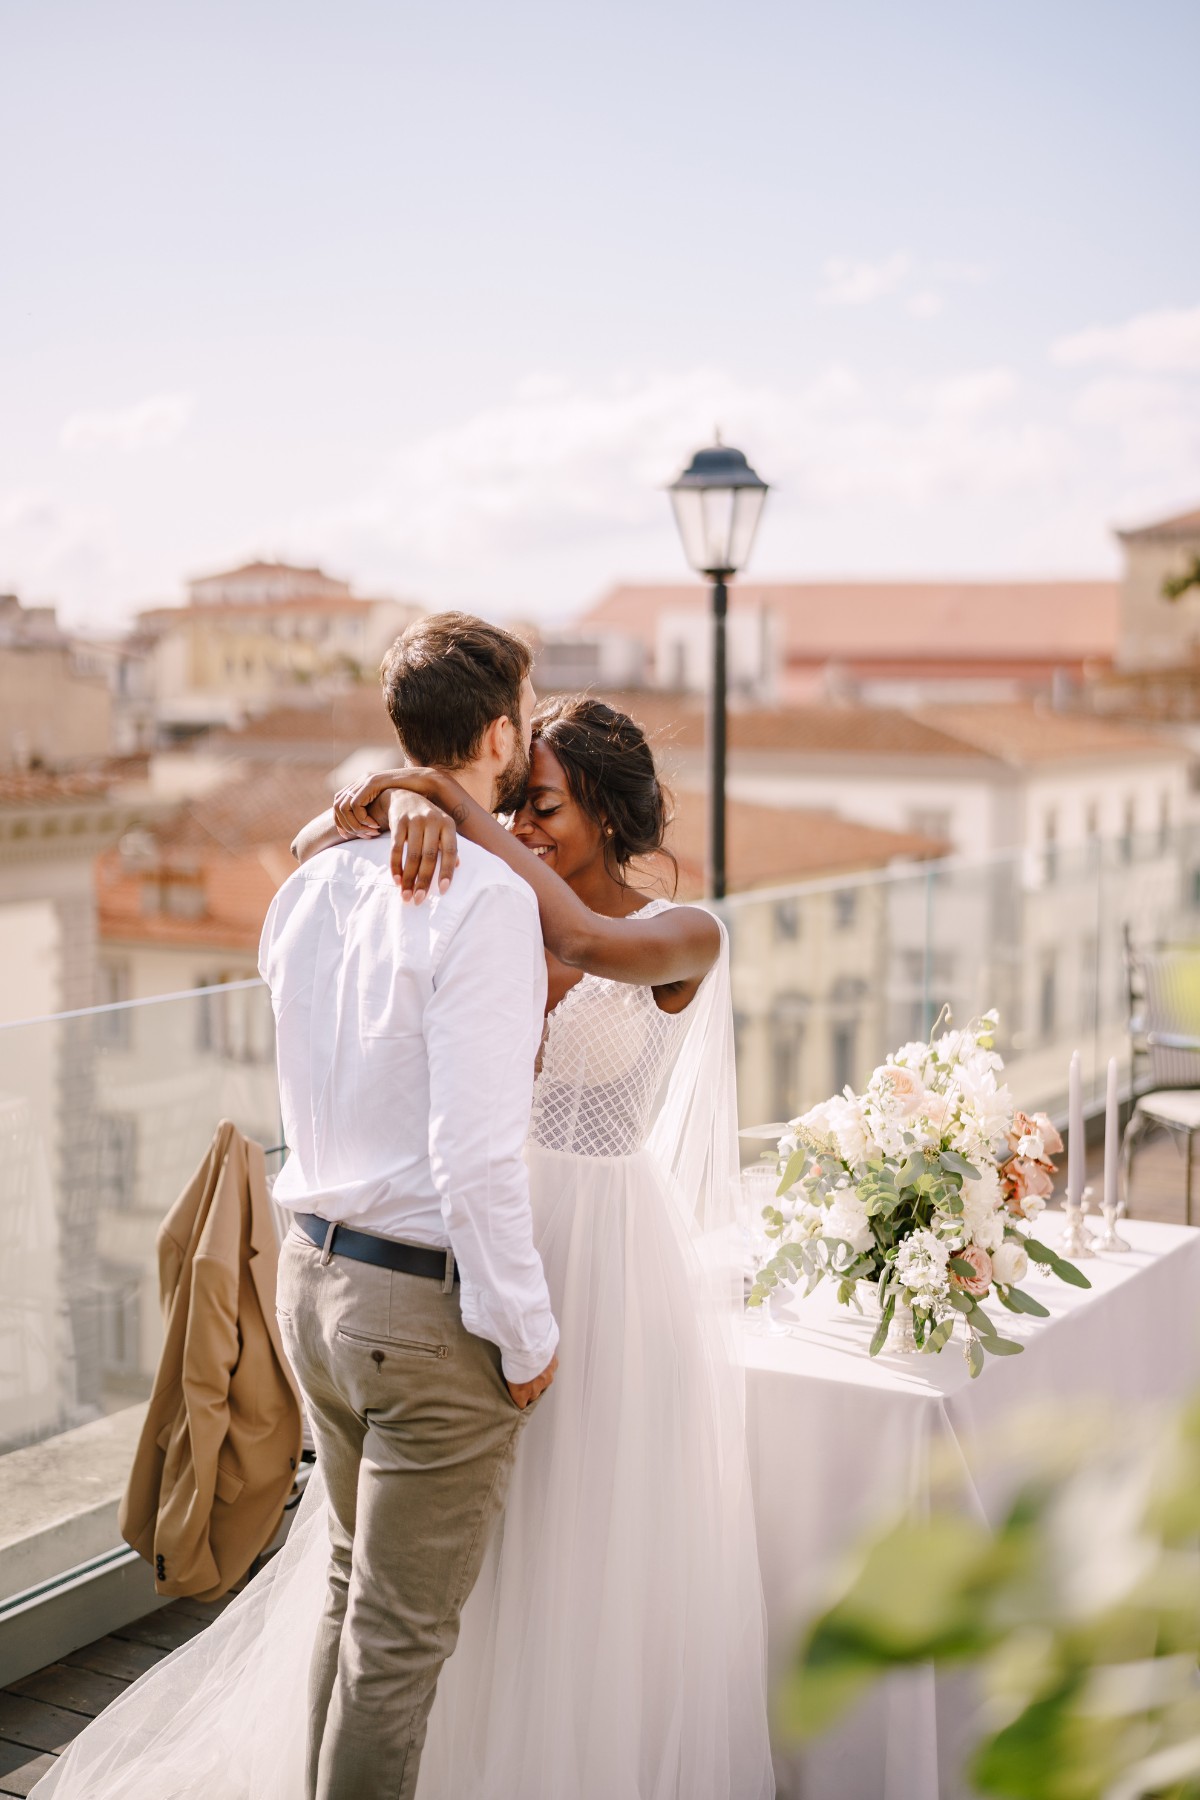 How To Elope Without Hurting Feelings: Family And Friends